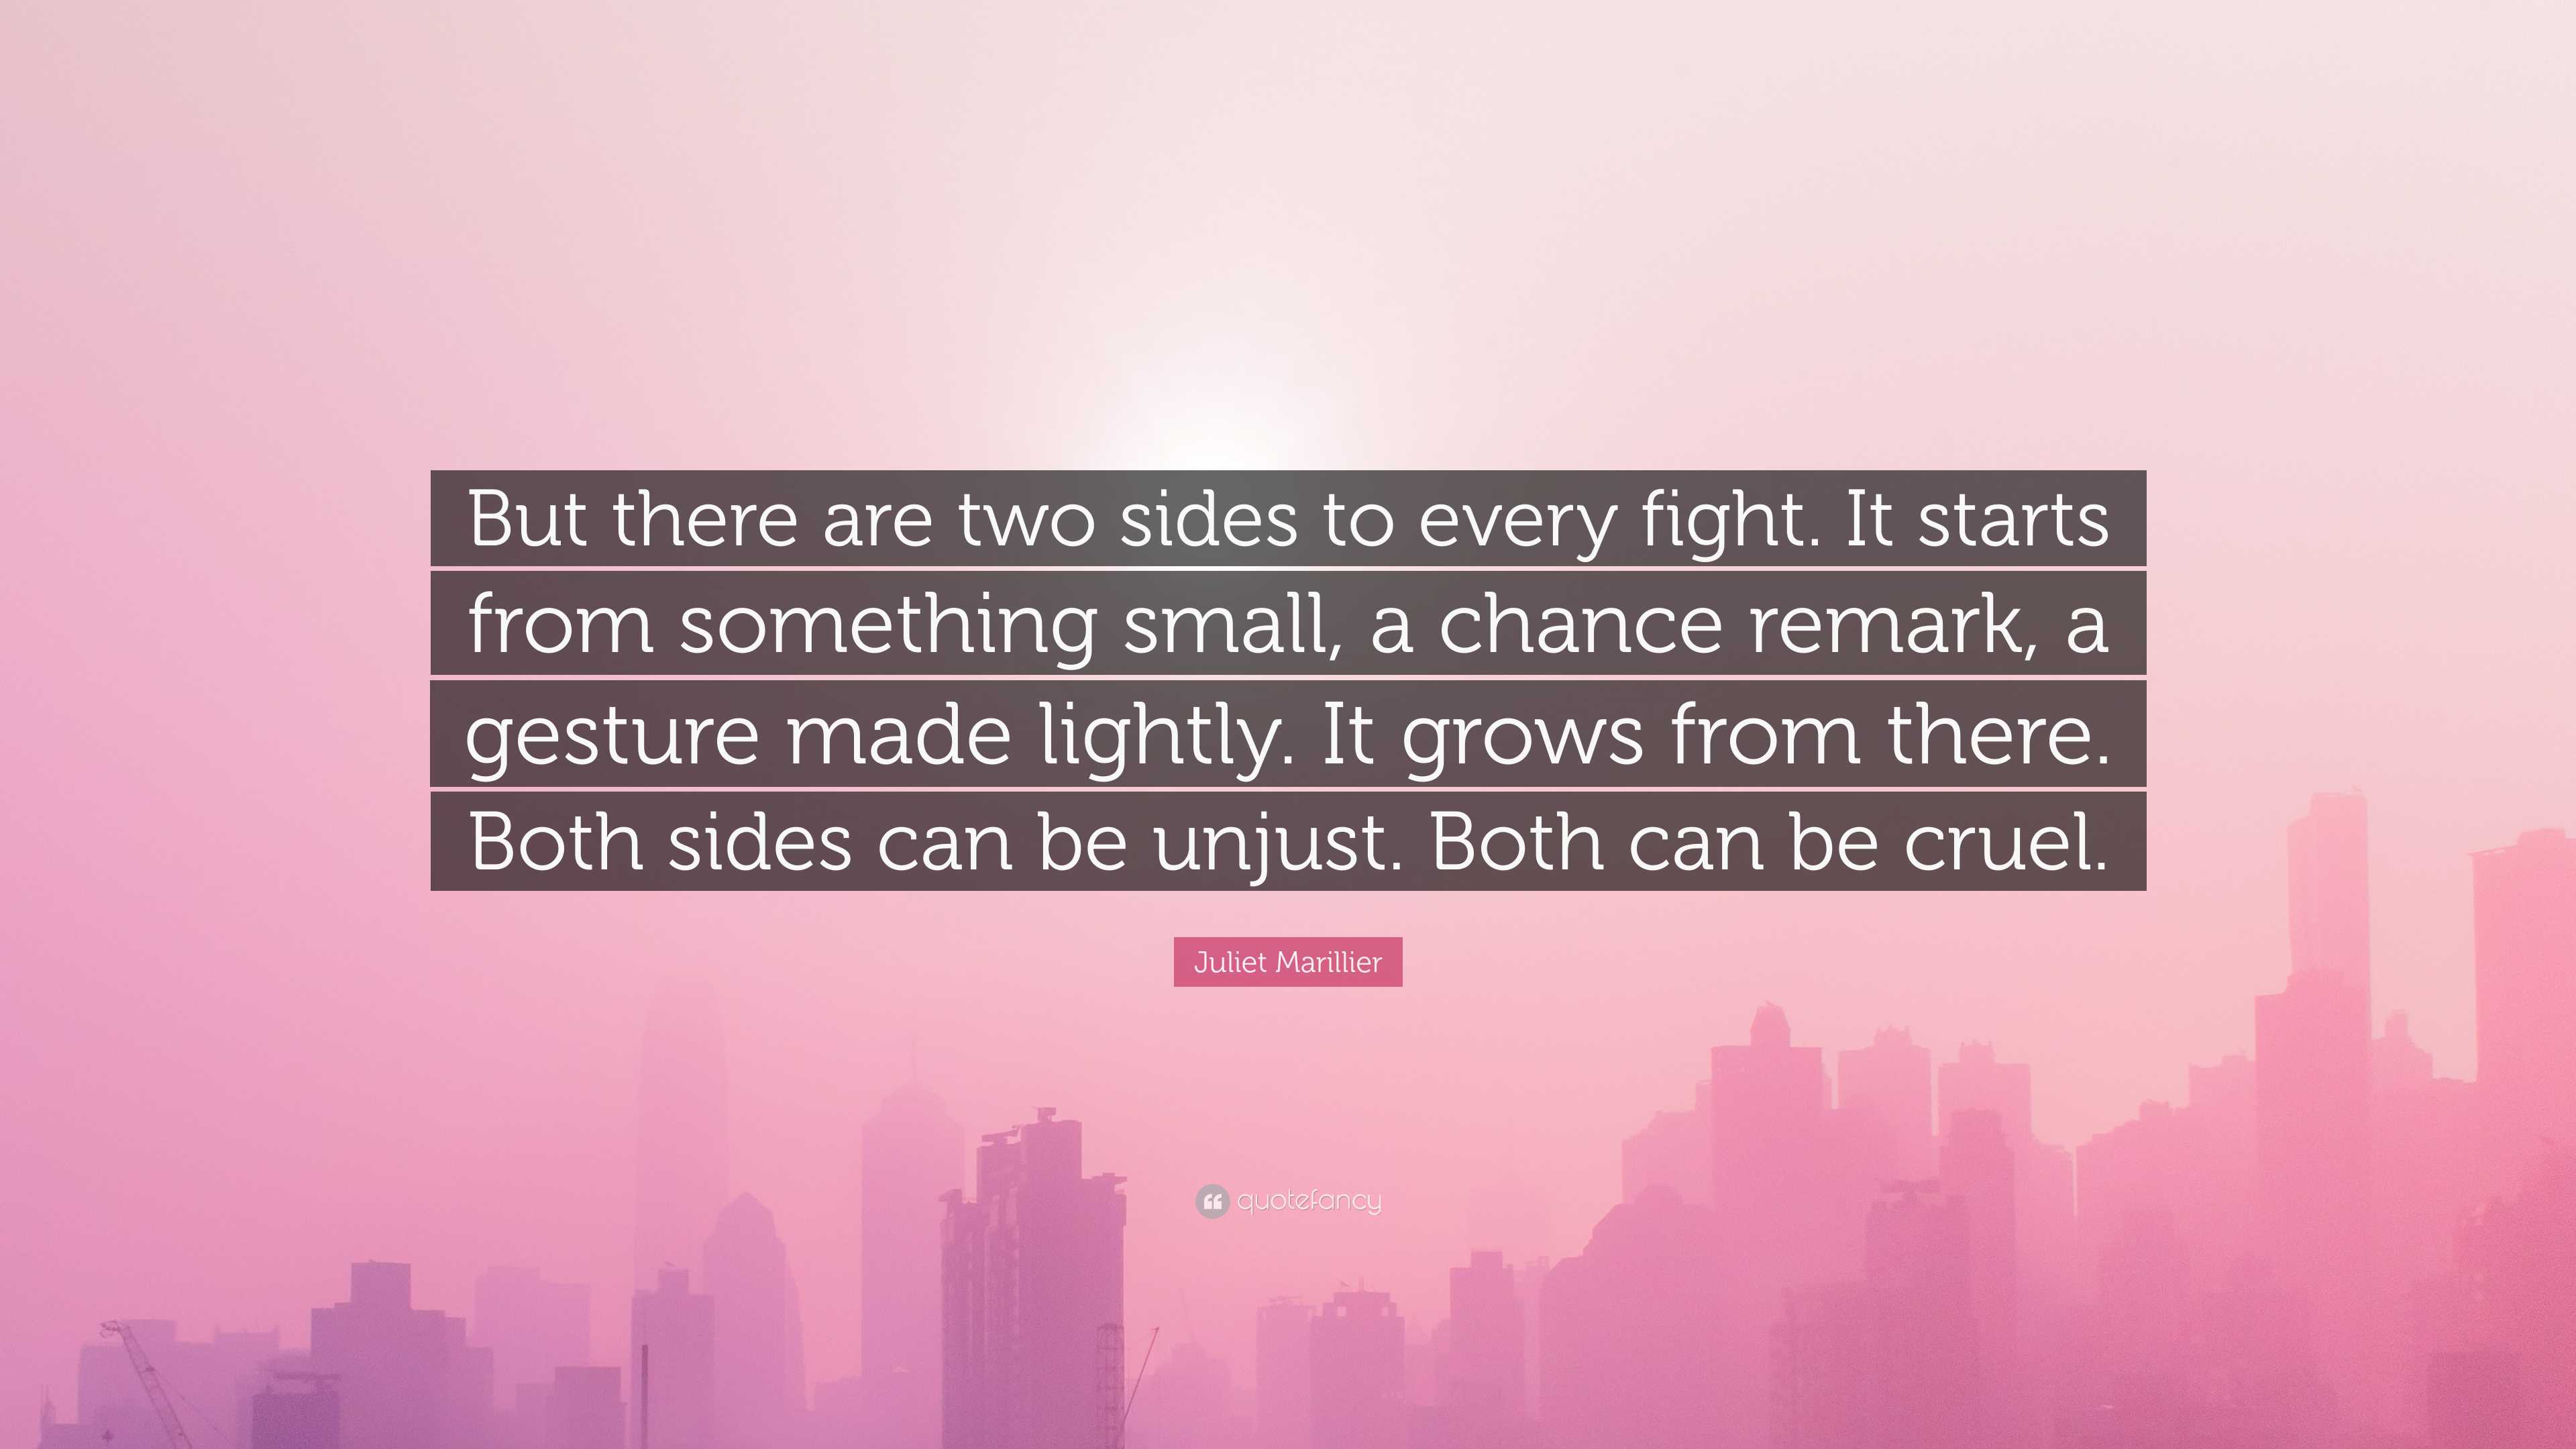 Juliet Marillier Quote: “But there are two sides to every fight. It starts  from something small, a chance remark, a gesture made lightly. It grow”